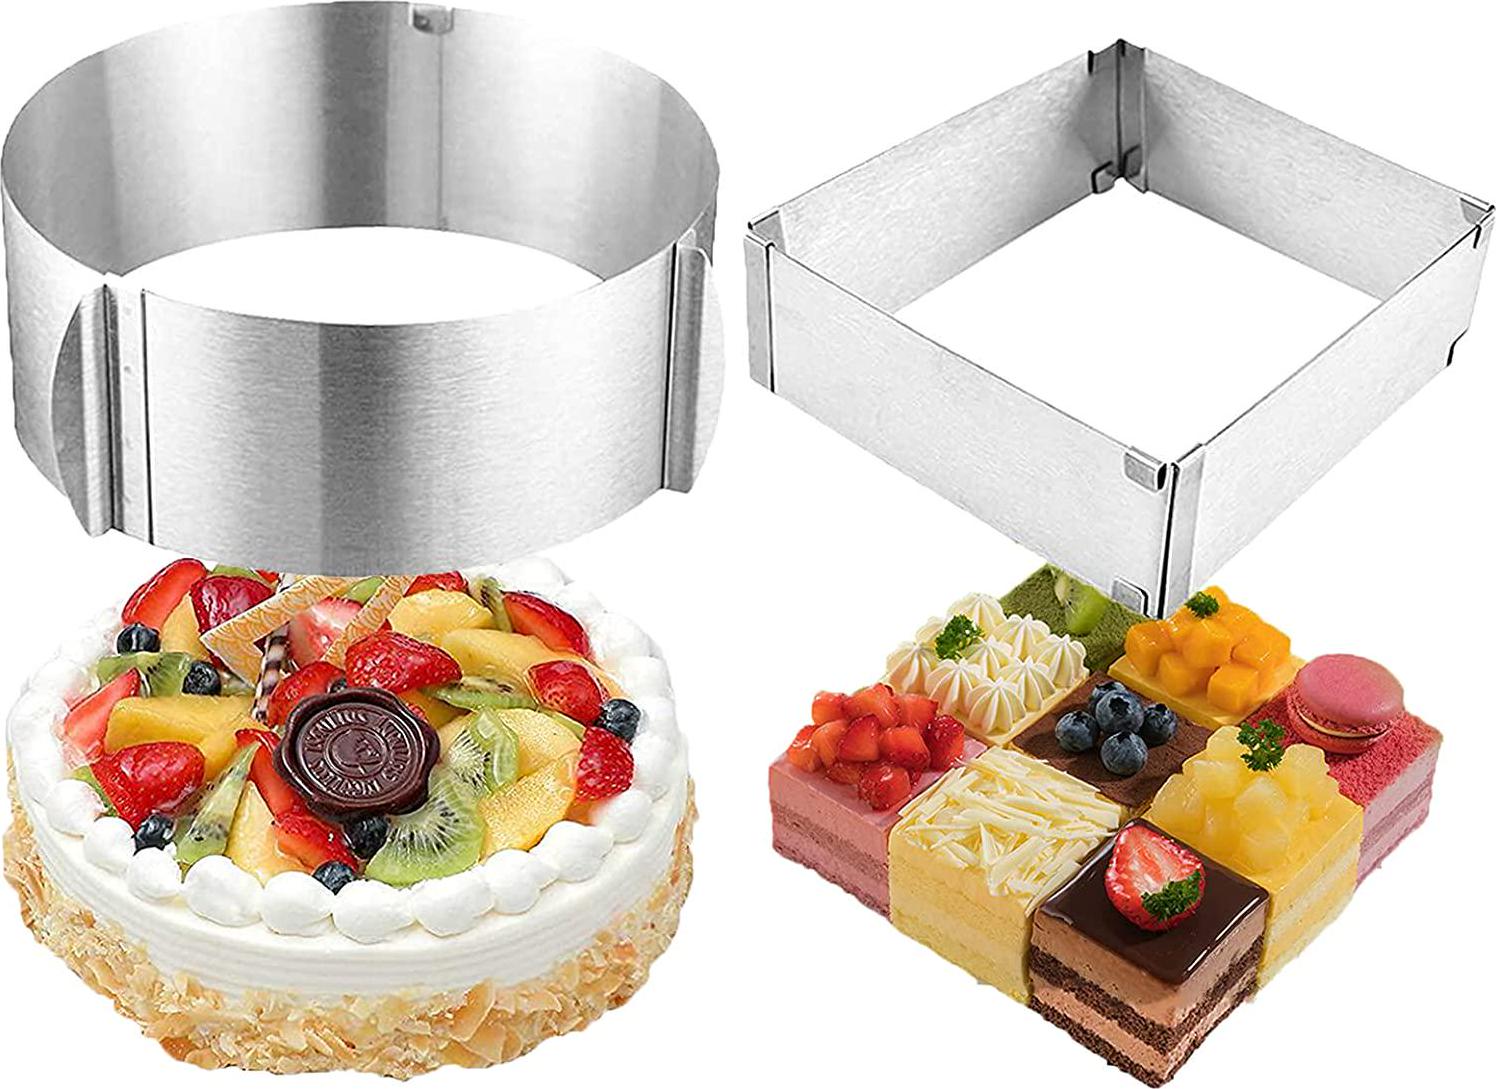 MANO, MANO 2-Piece Stainless Steel Cake Ring 6 to 12 Inch Adjustable Mousse Cake Molds Round and Square Cake Decor Baking Mold Ring Bakeware Set Tool